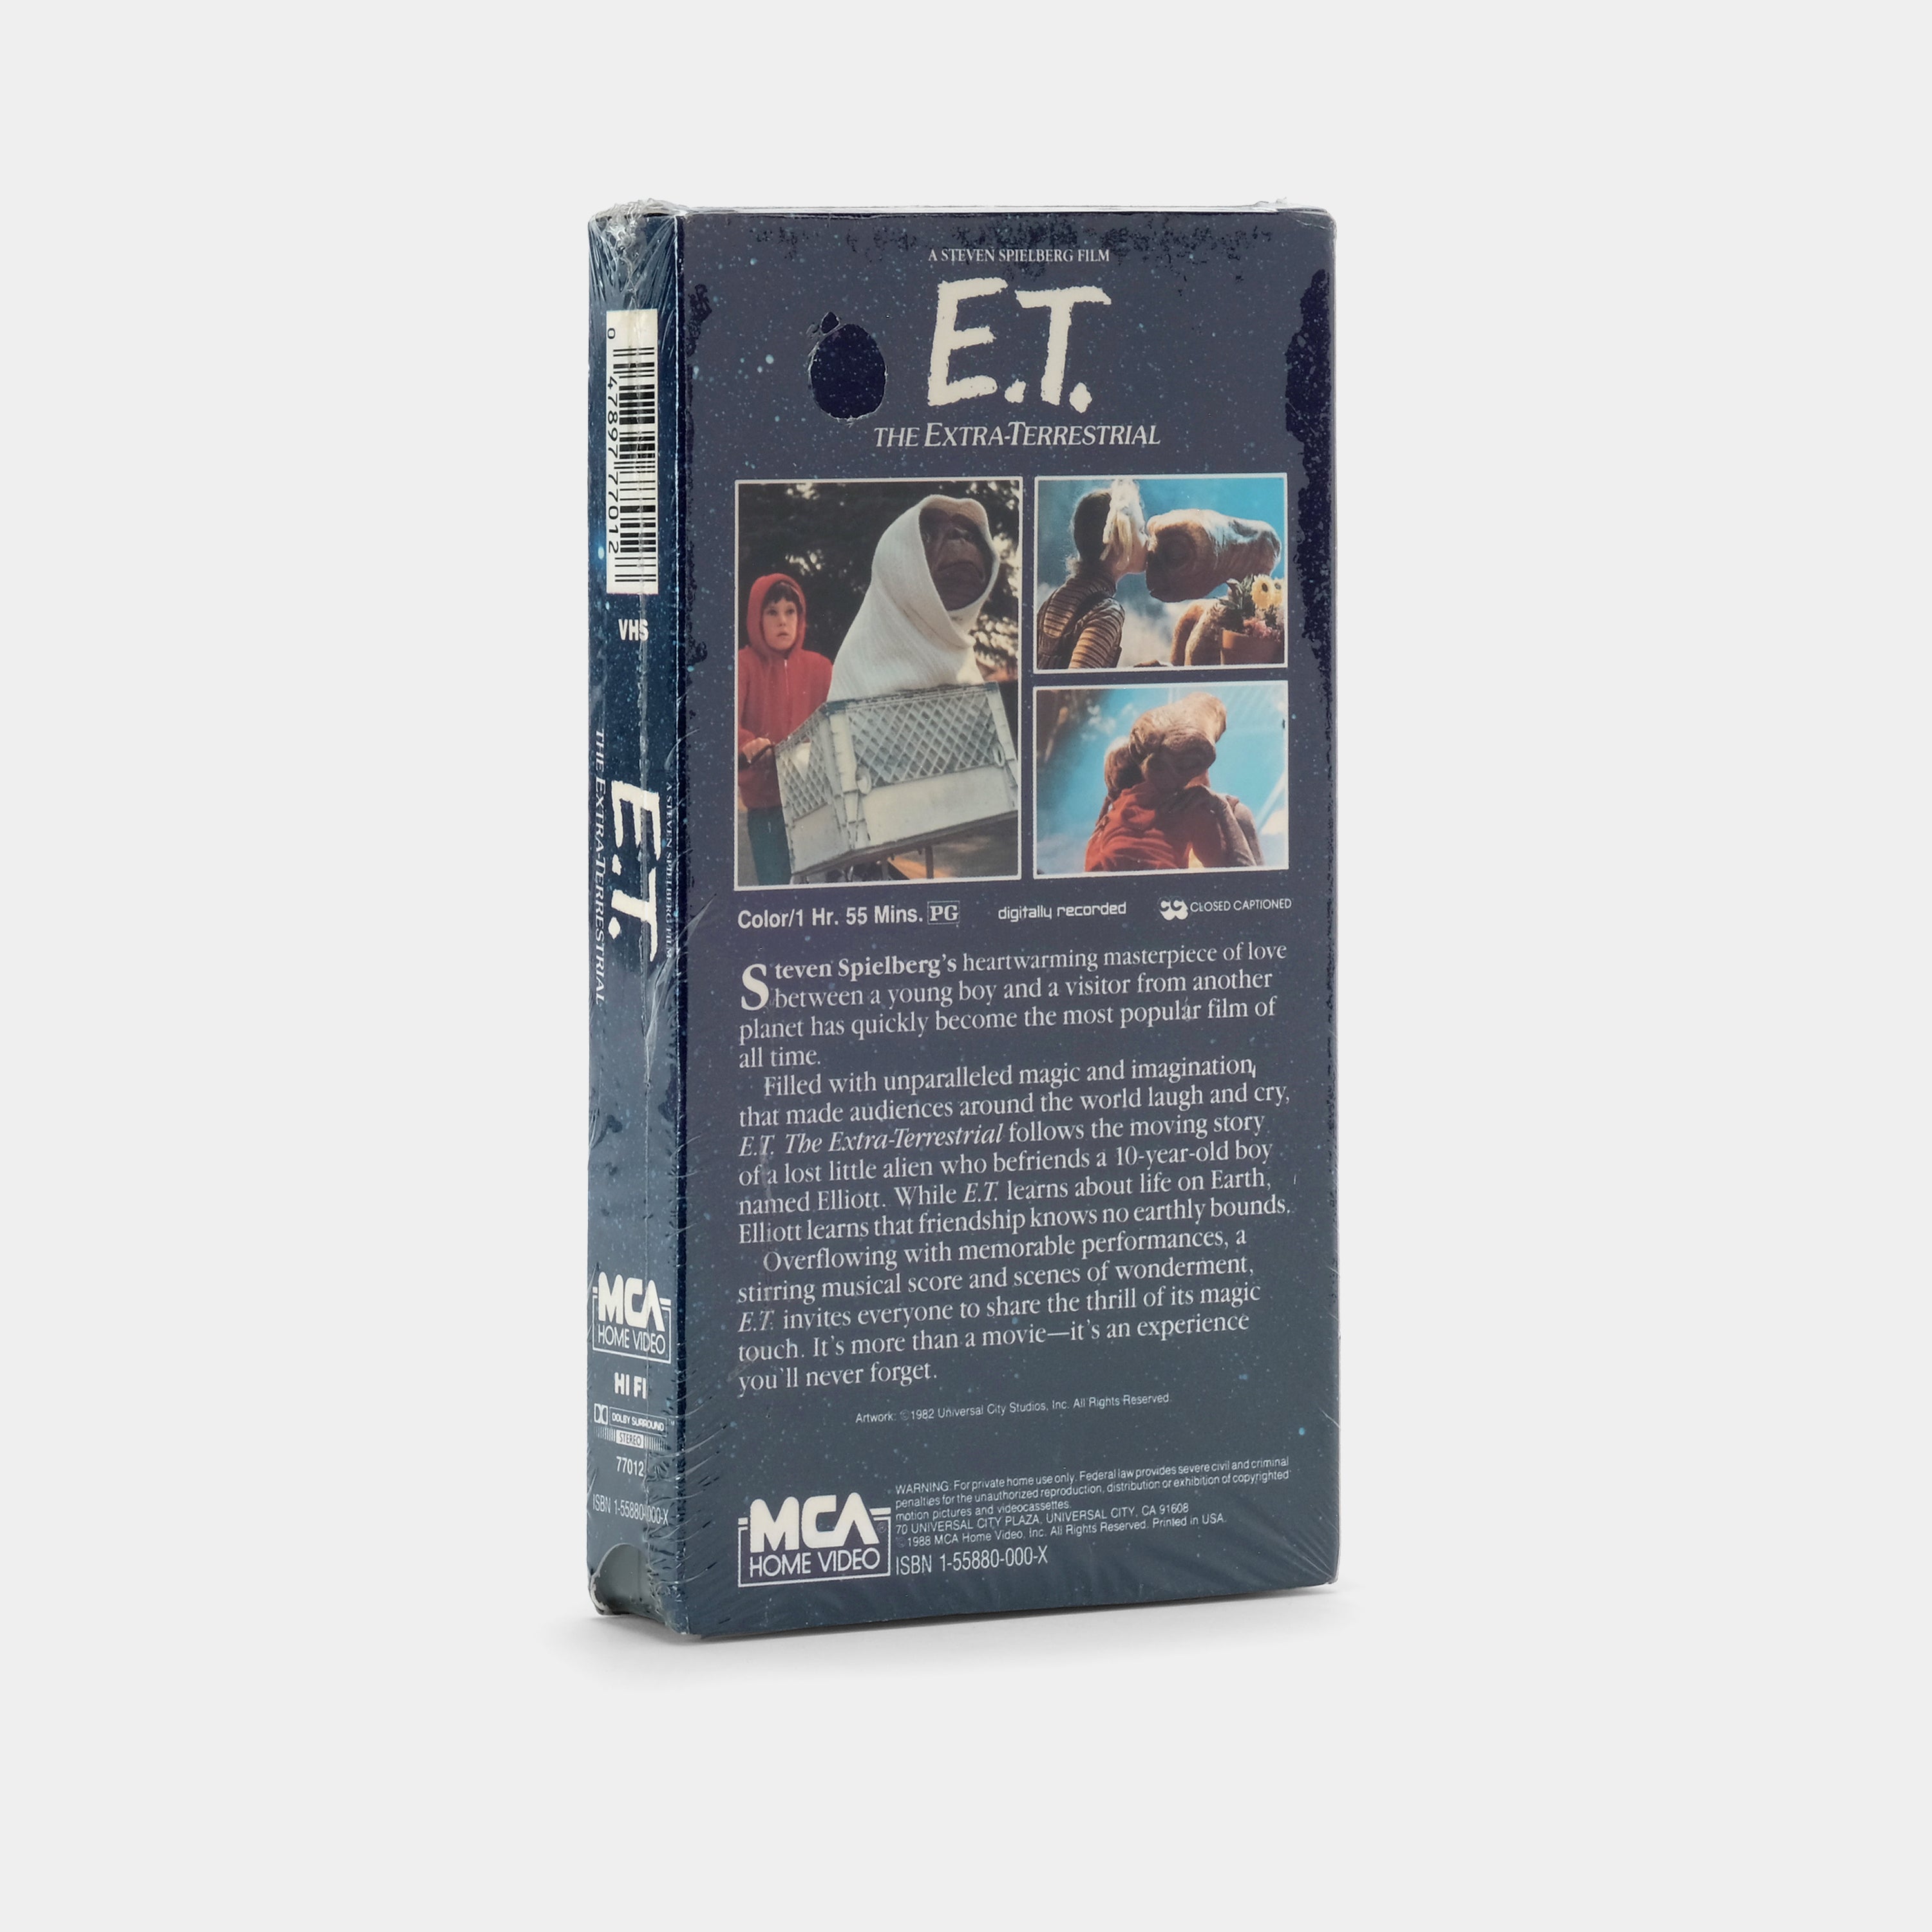 E.T. The Extra-Terrestrial (Sealed) VHS Tape